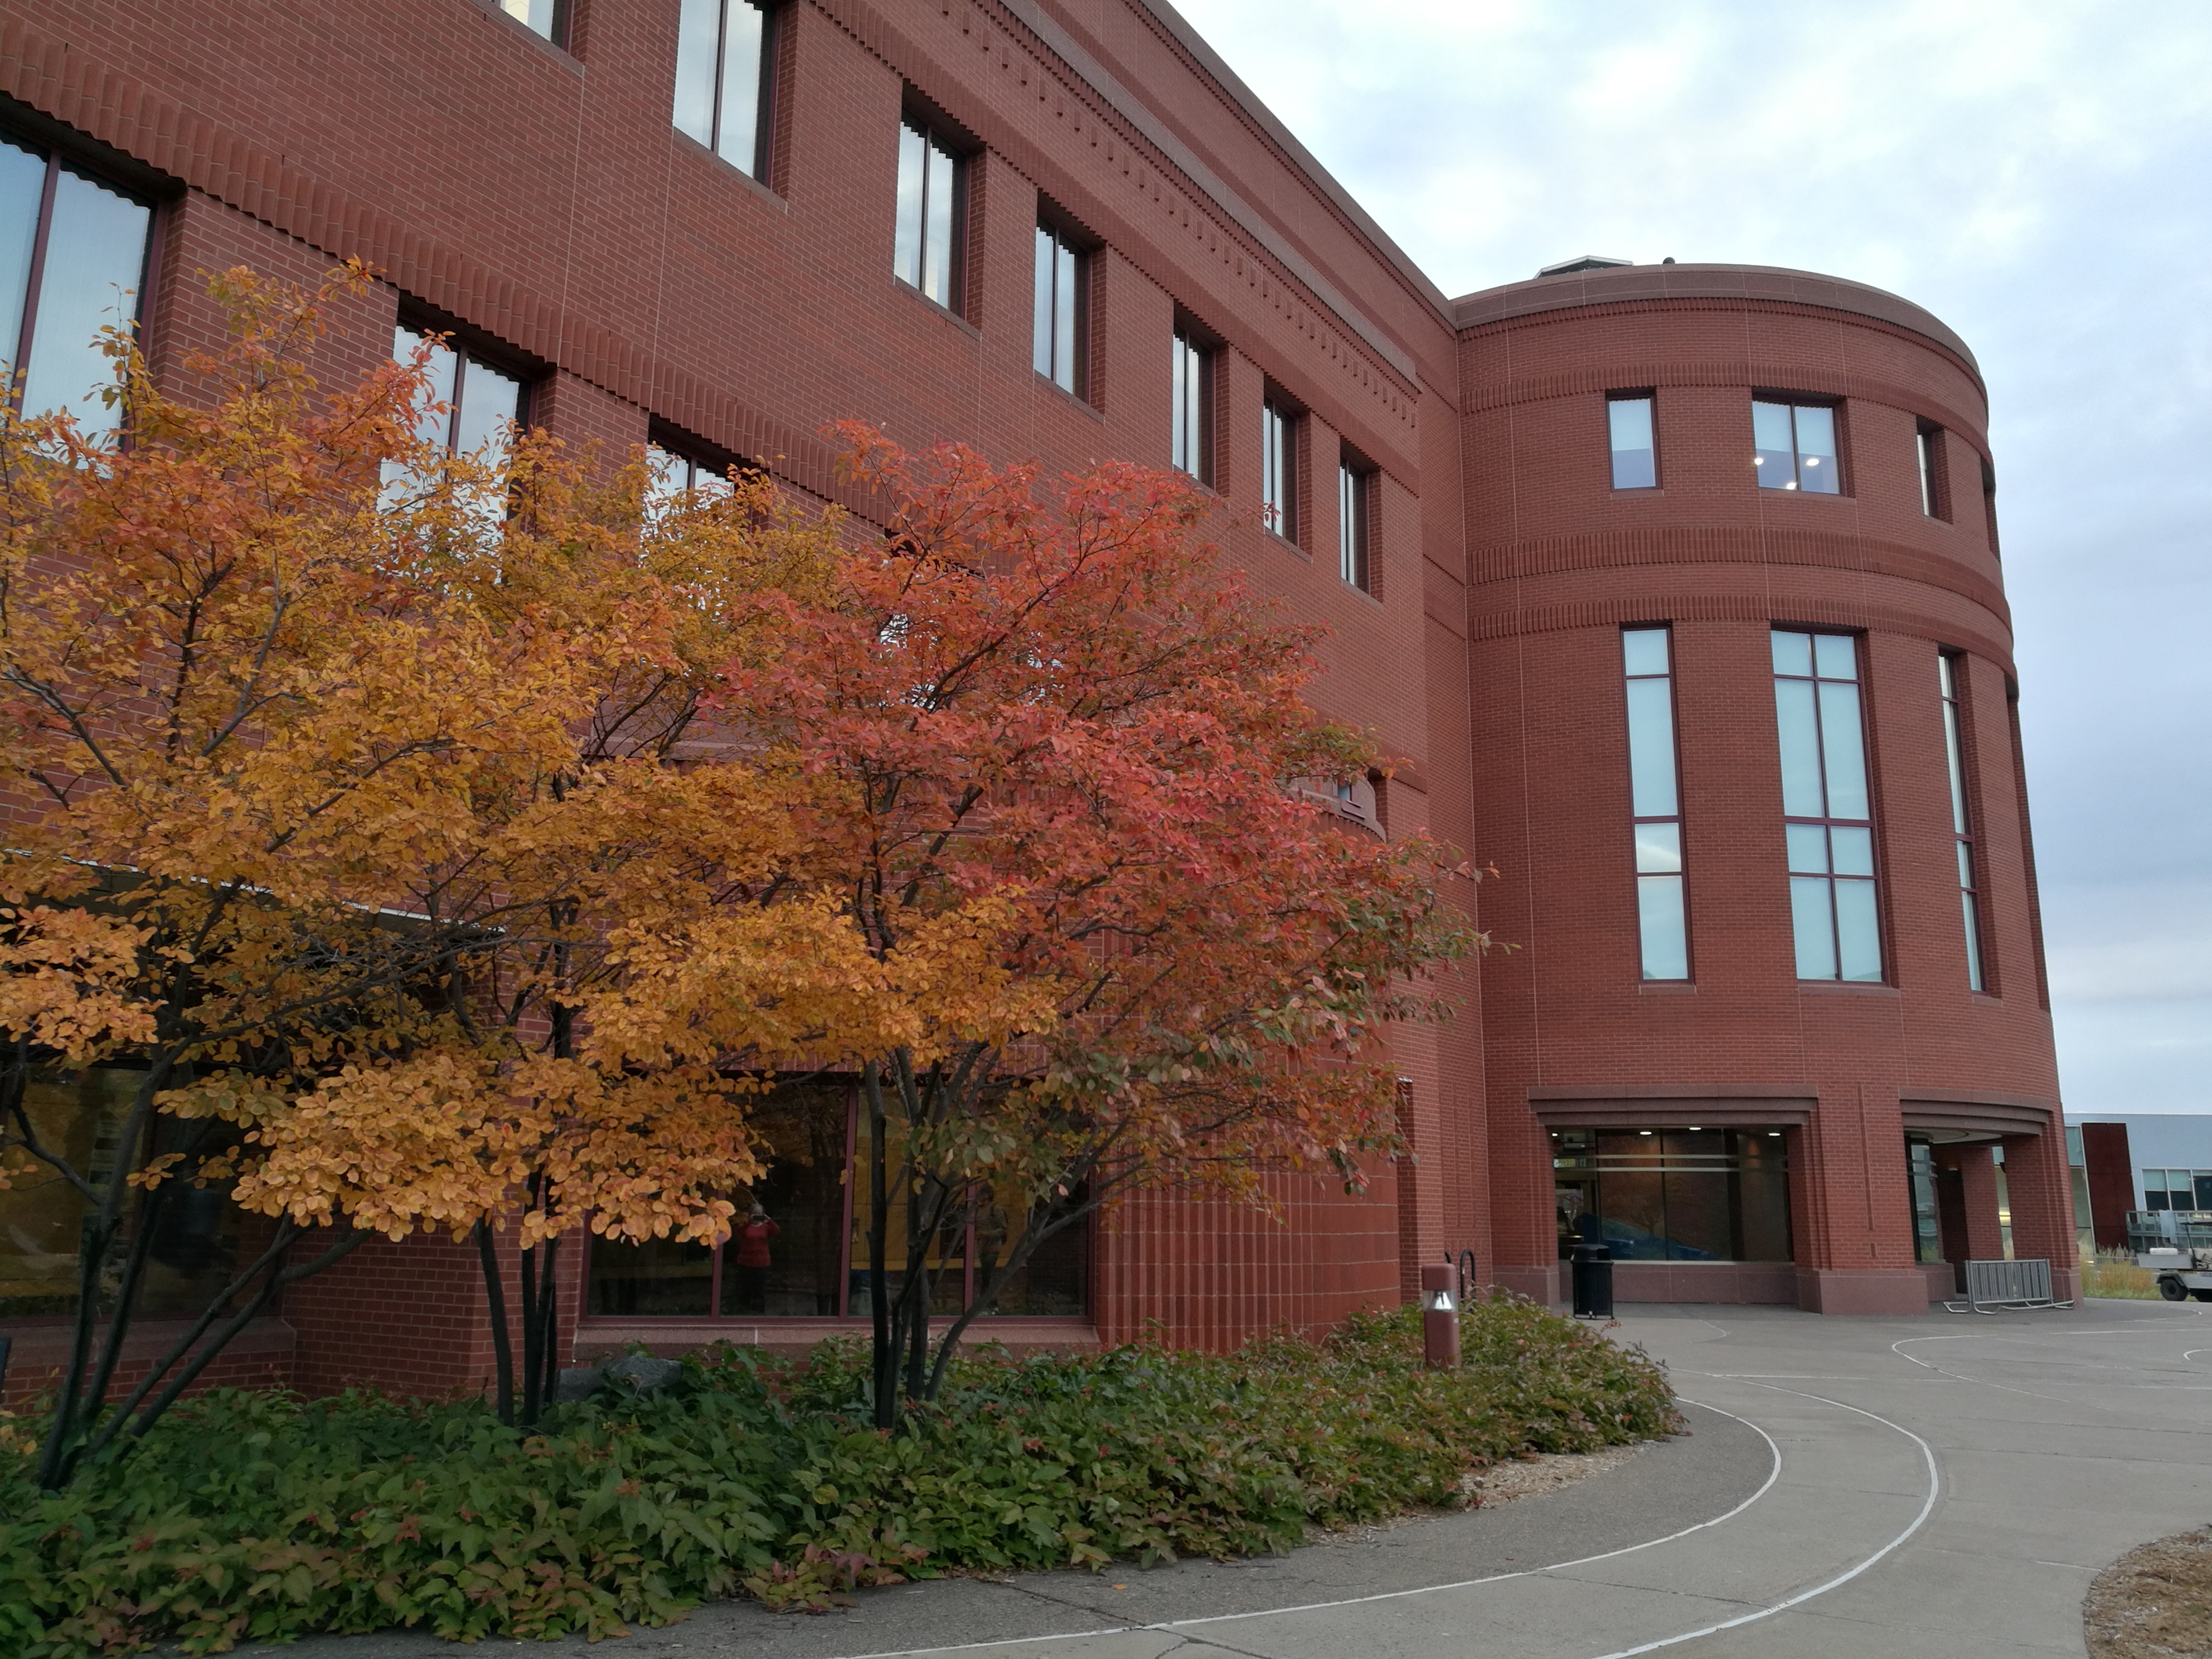 Exterior image, taken in the fall, of the UMD Kathryn A. Martin Library